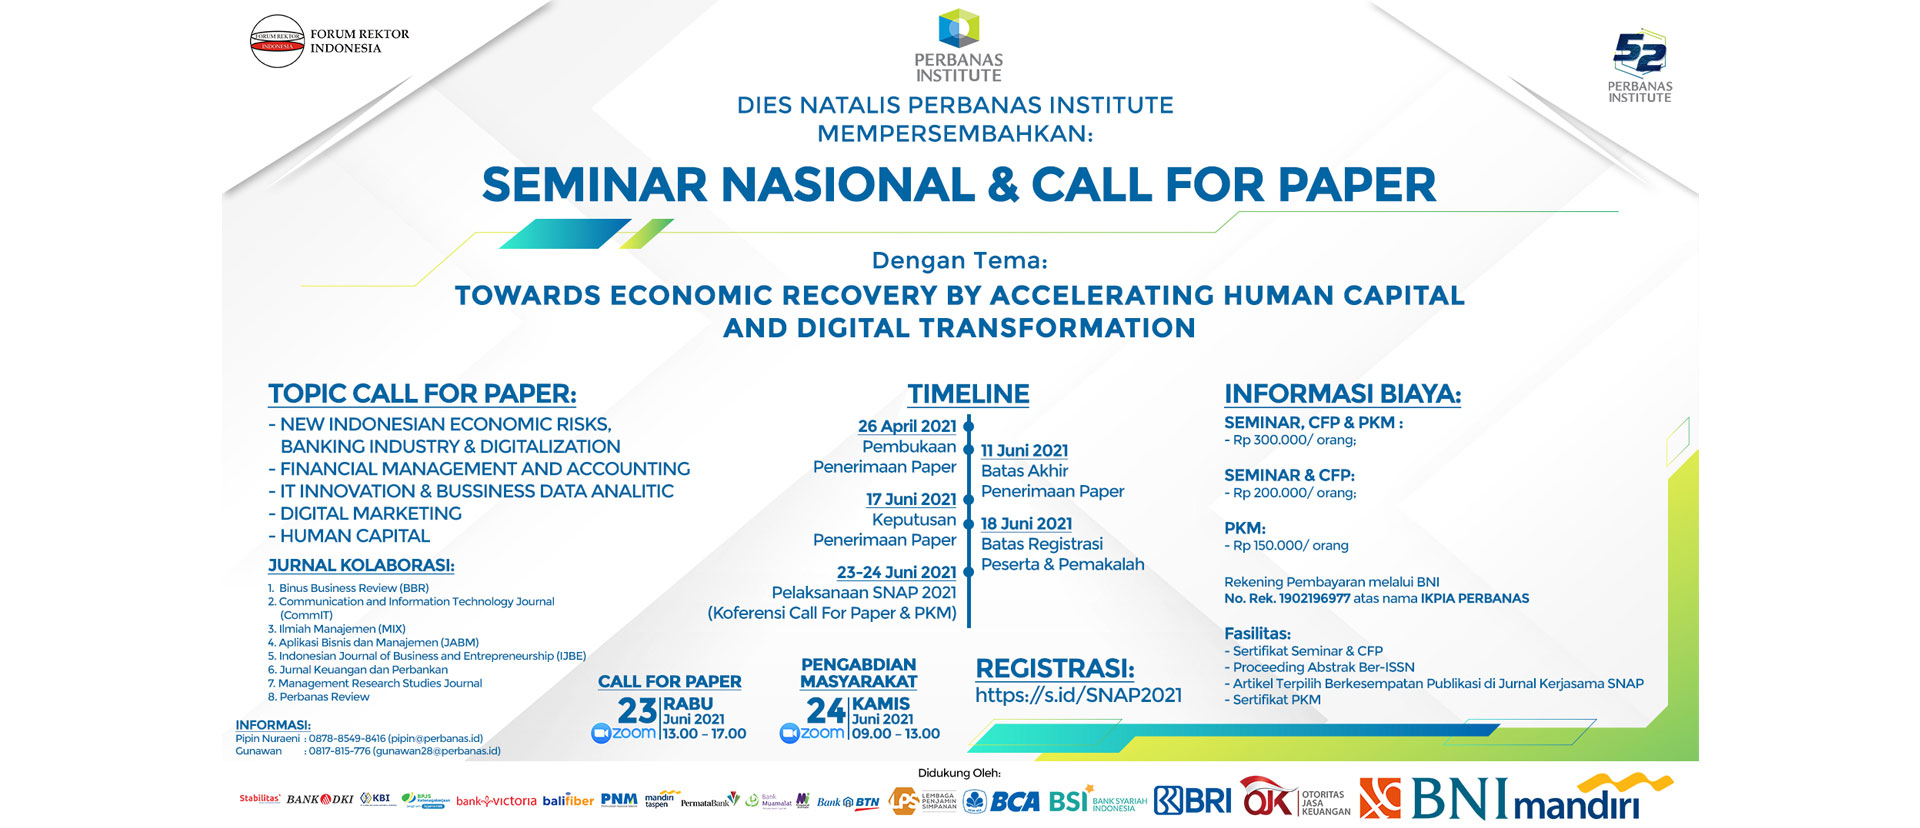 Call for Paper Poster